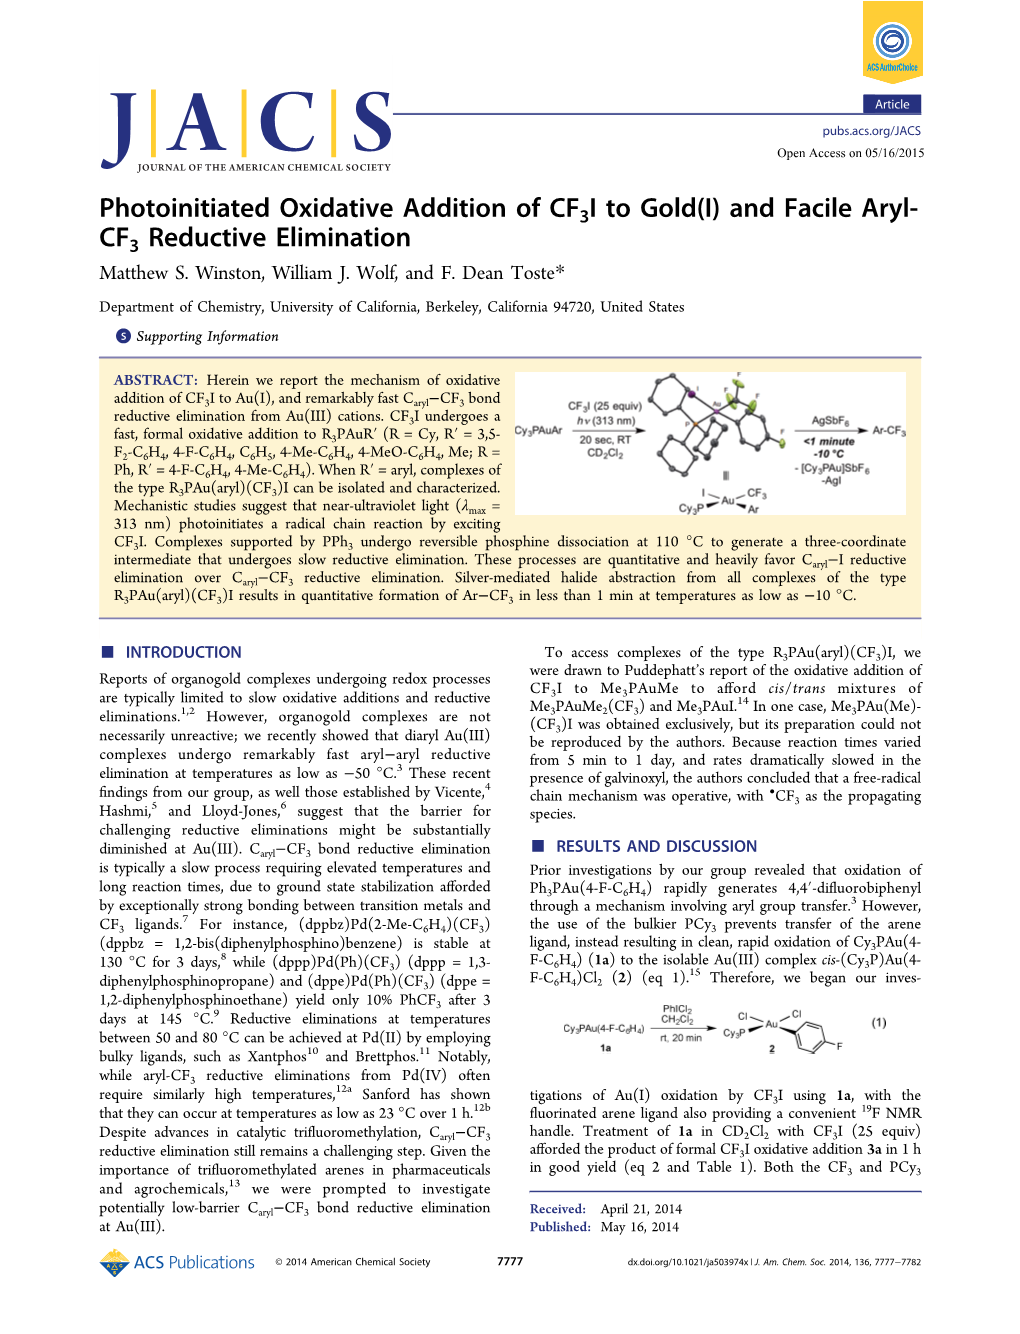 Photoinitiated Oxidative Addition of CF3I to Gold(I) and Facile Aryl- CF3 Reductive Elimination Matthew S